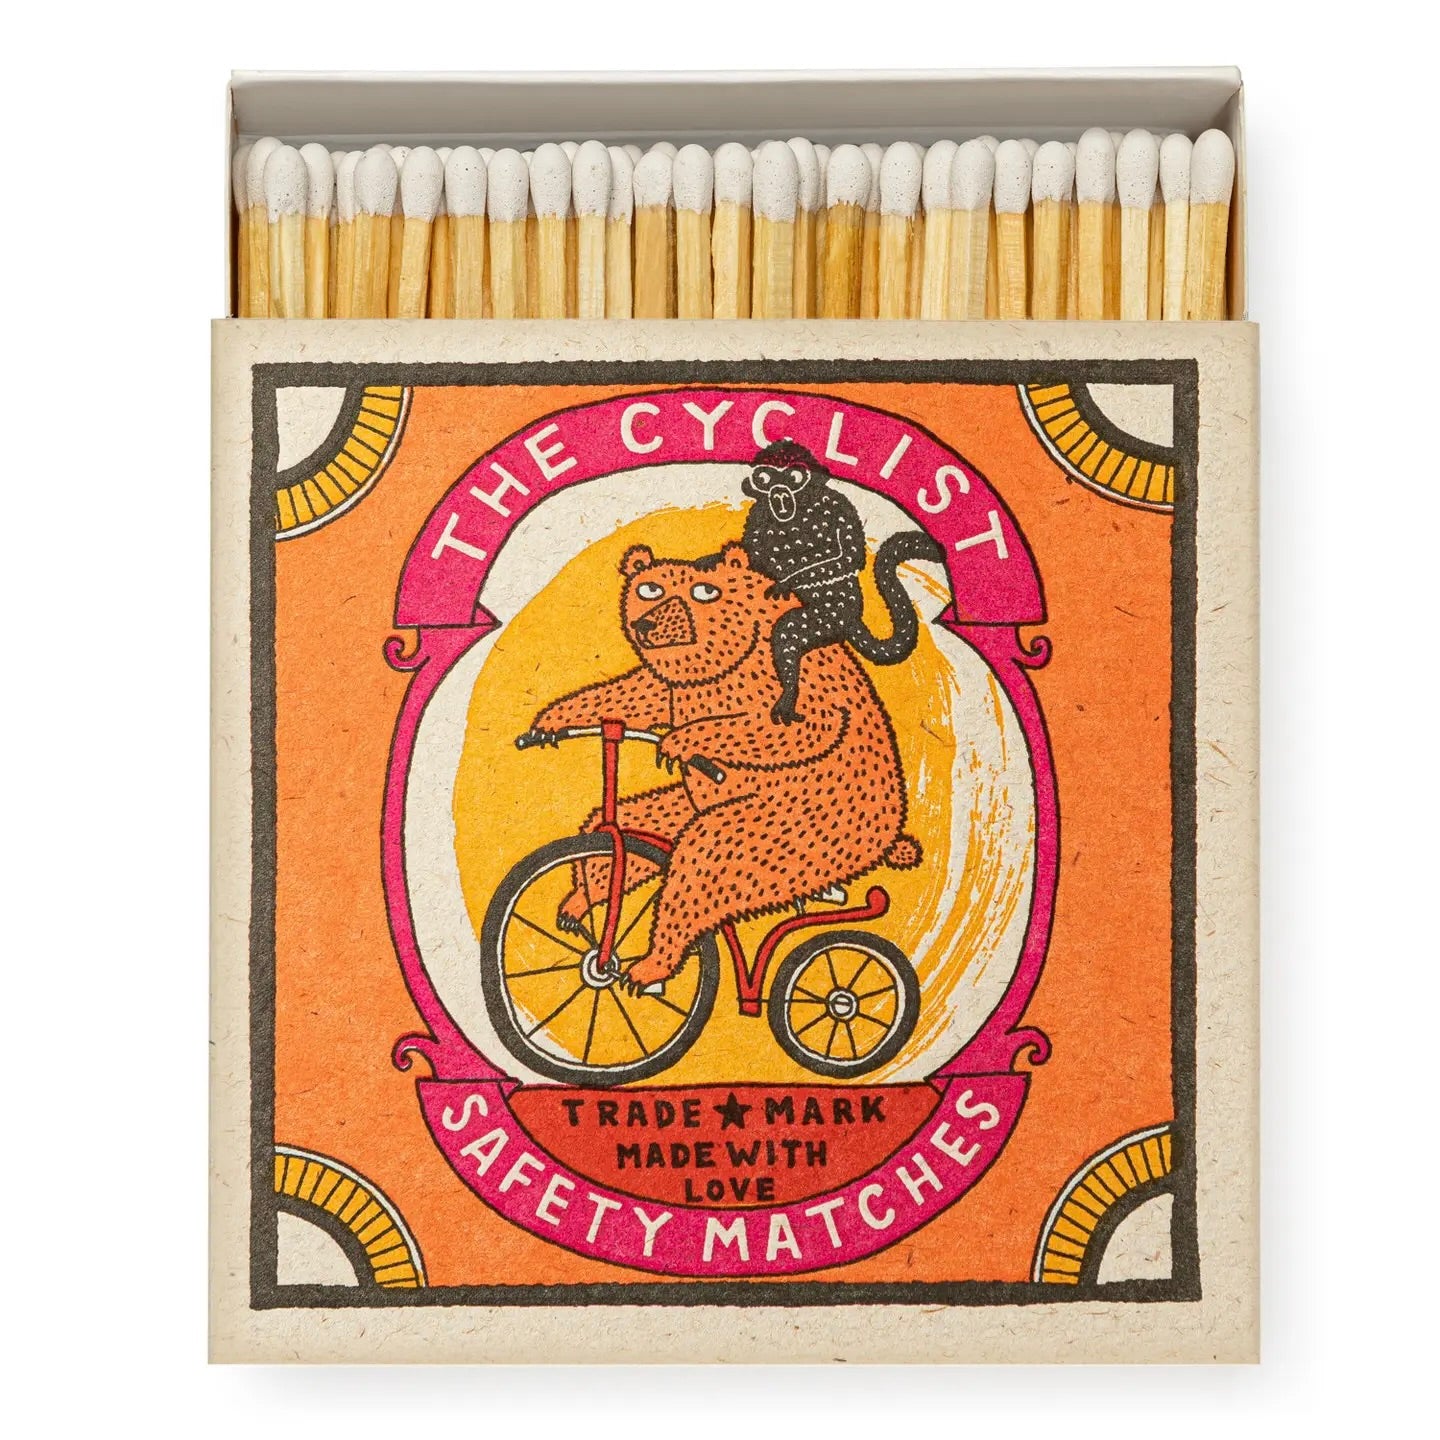 The Cycllst Square Matchbox